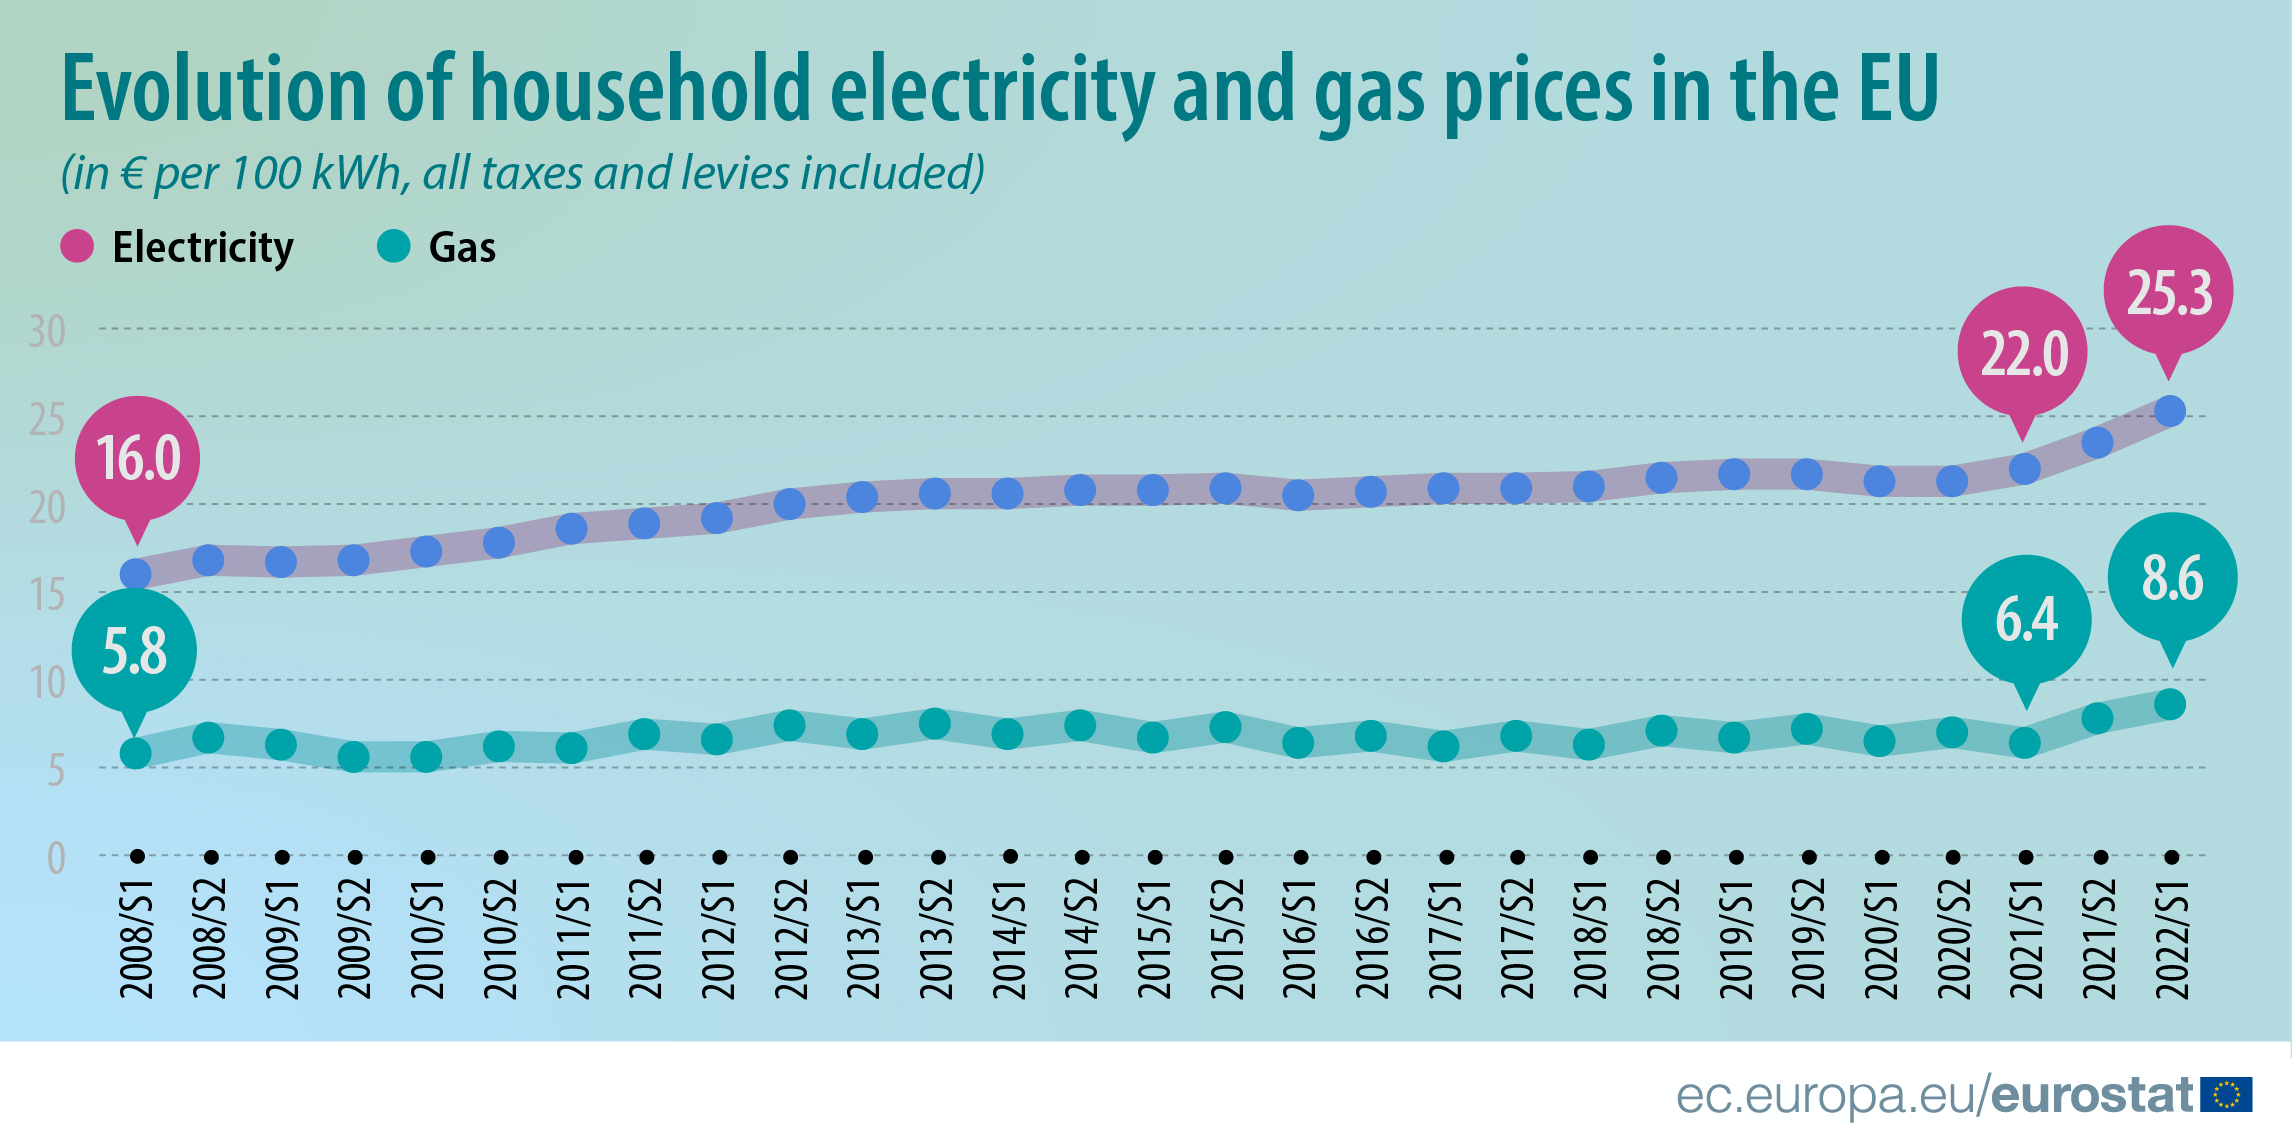 Timeline: evolution of household electricity and gas prices in the EU (in € per 100 kWh, all taxes and levies included), S1 2008 to S1 2022